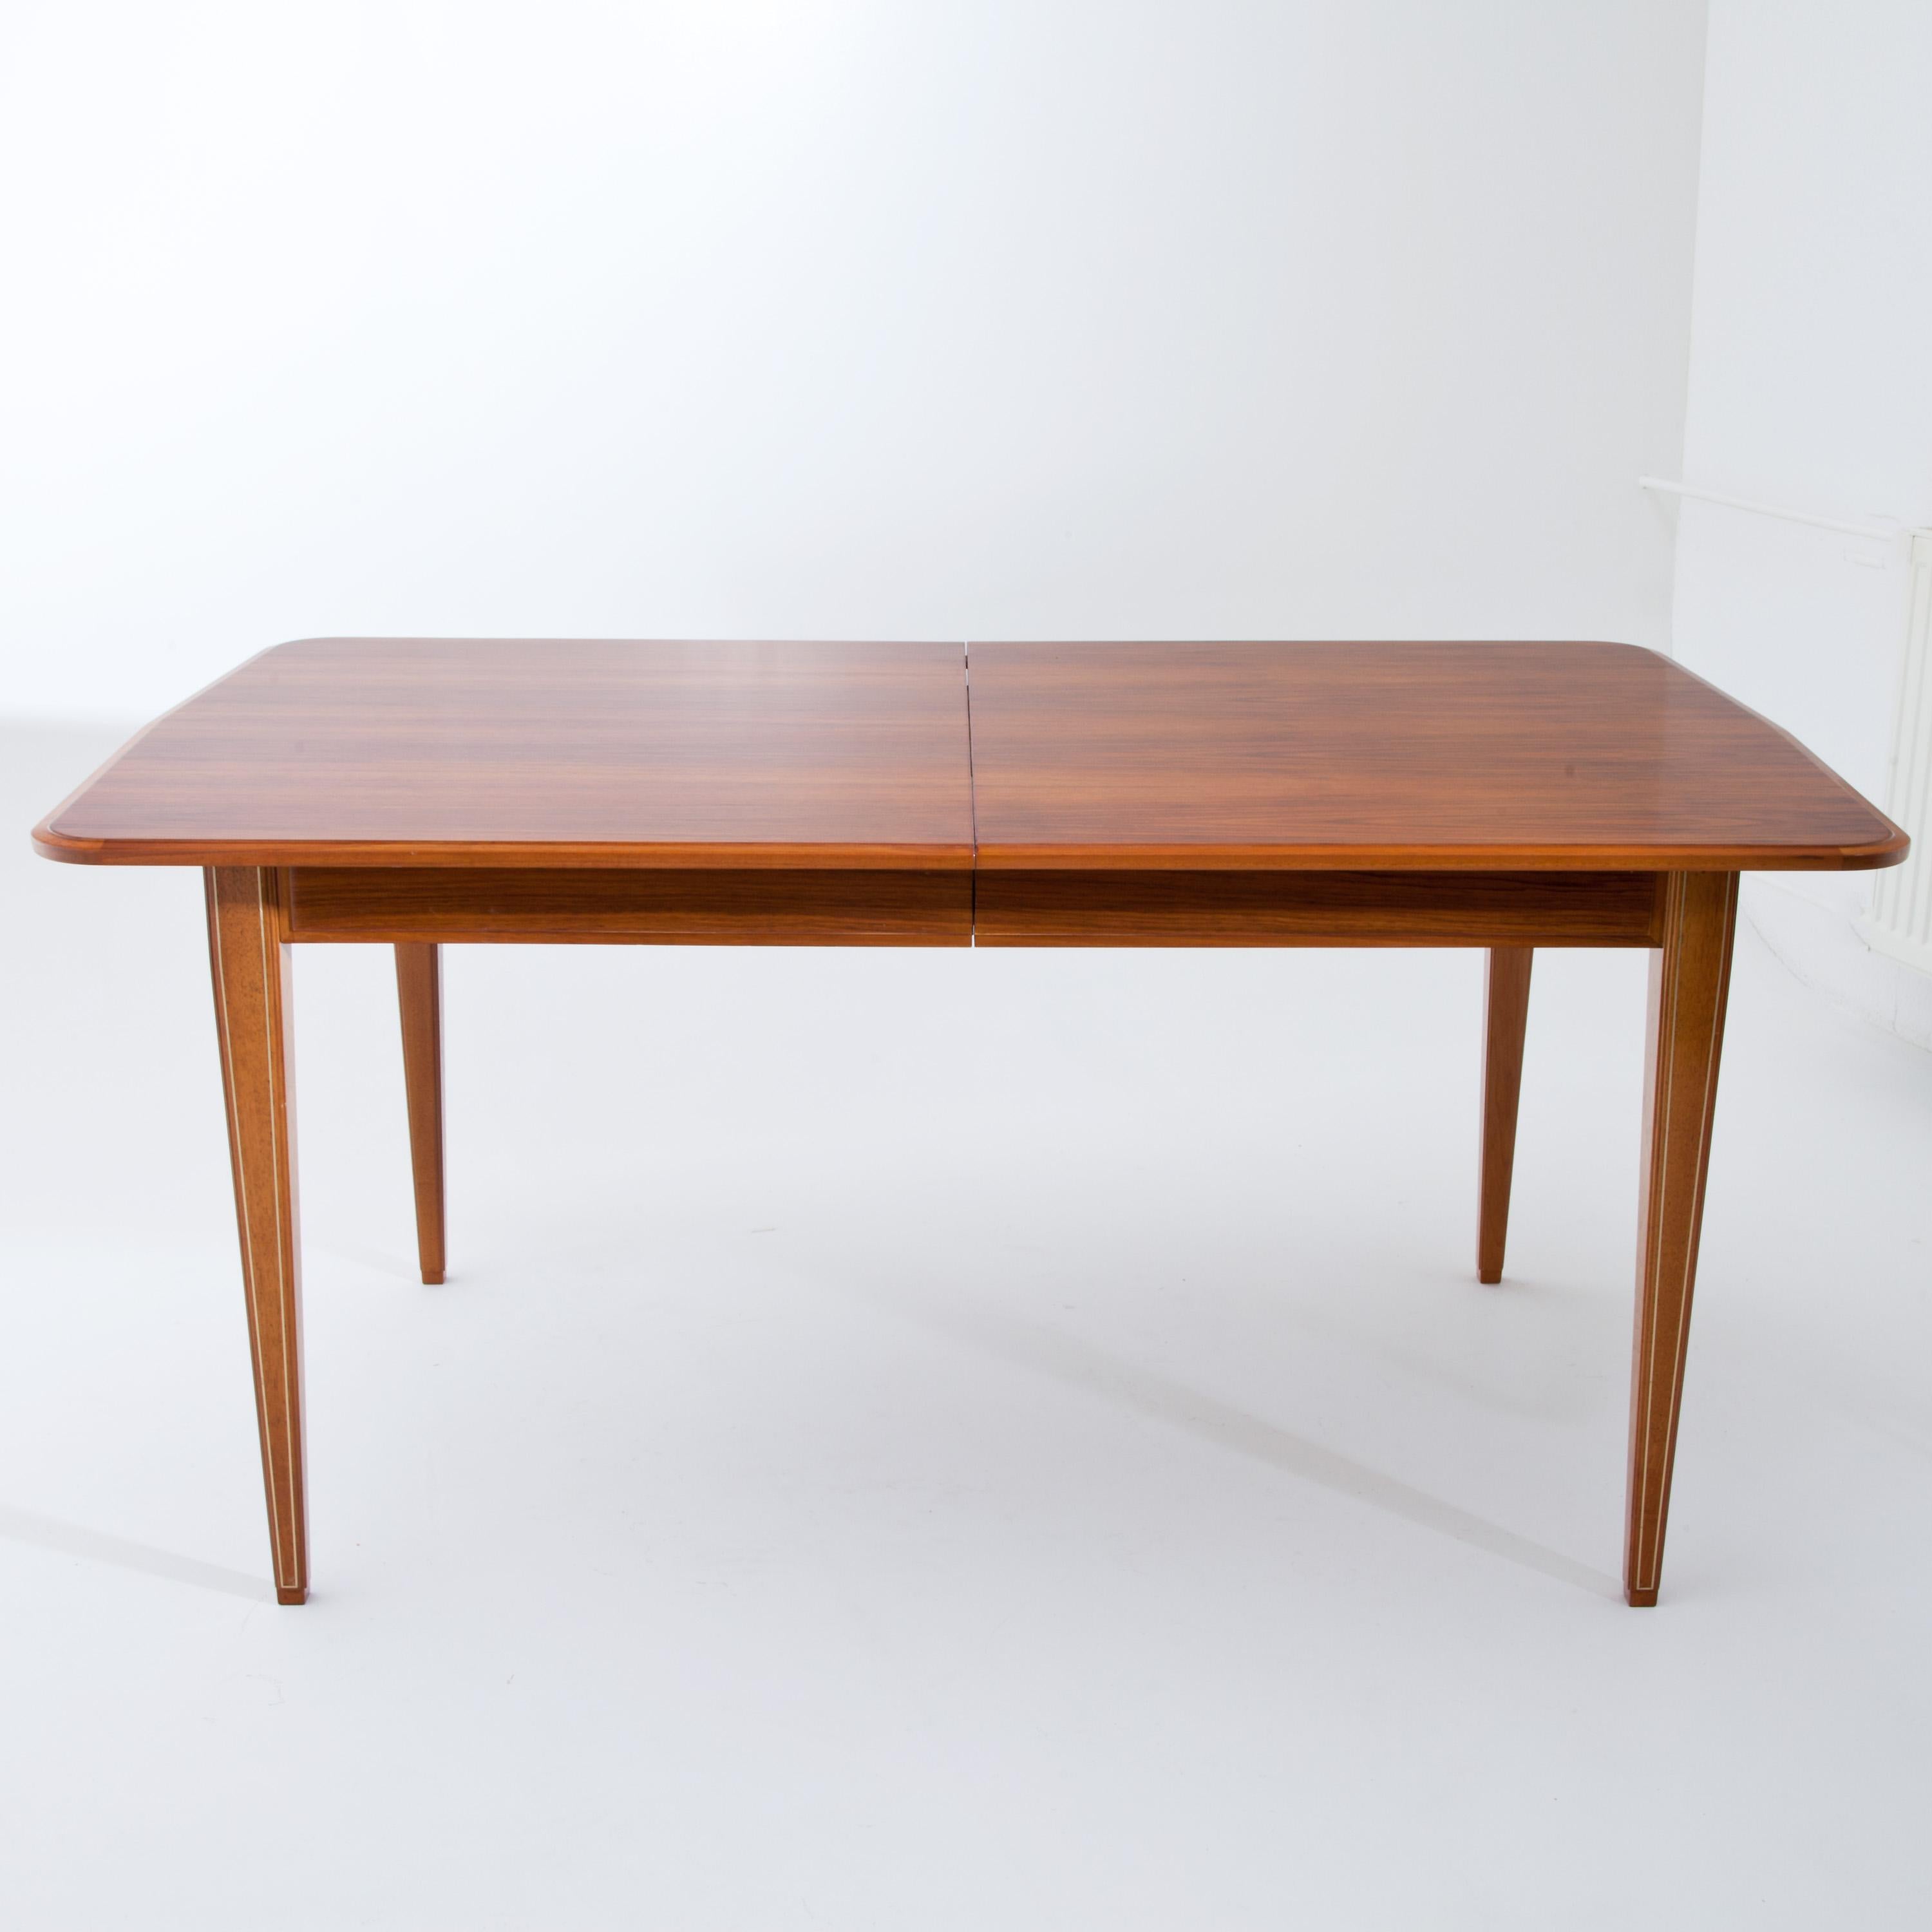 Mid-Century Modern Extendable Dining Table with Brass Inlays, France, Mid-20th Century